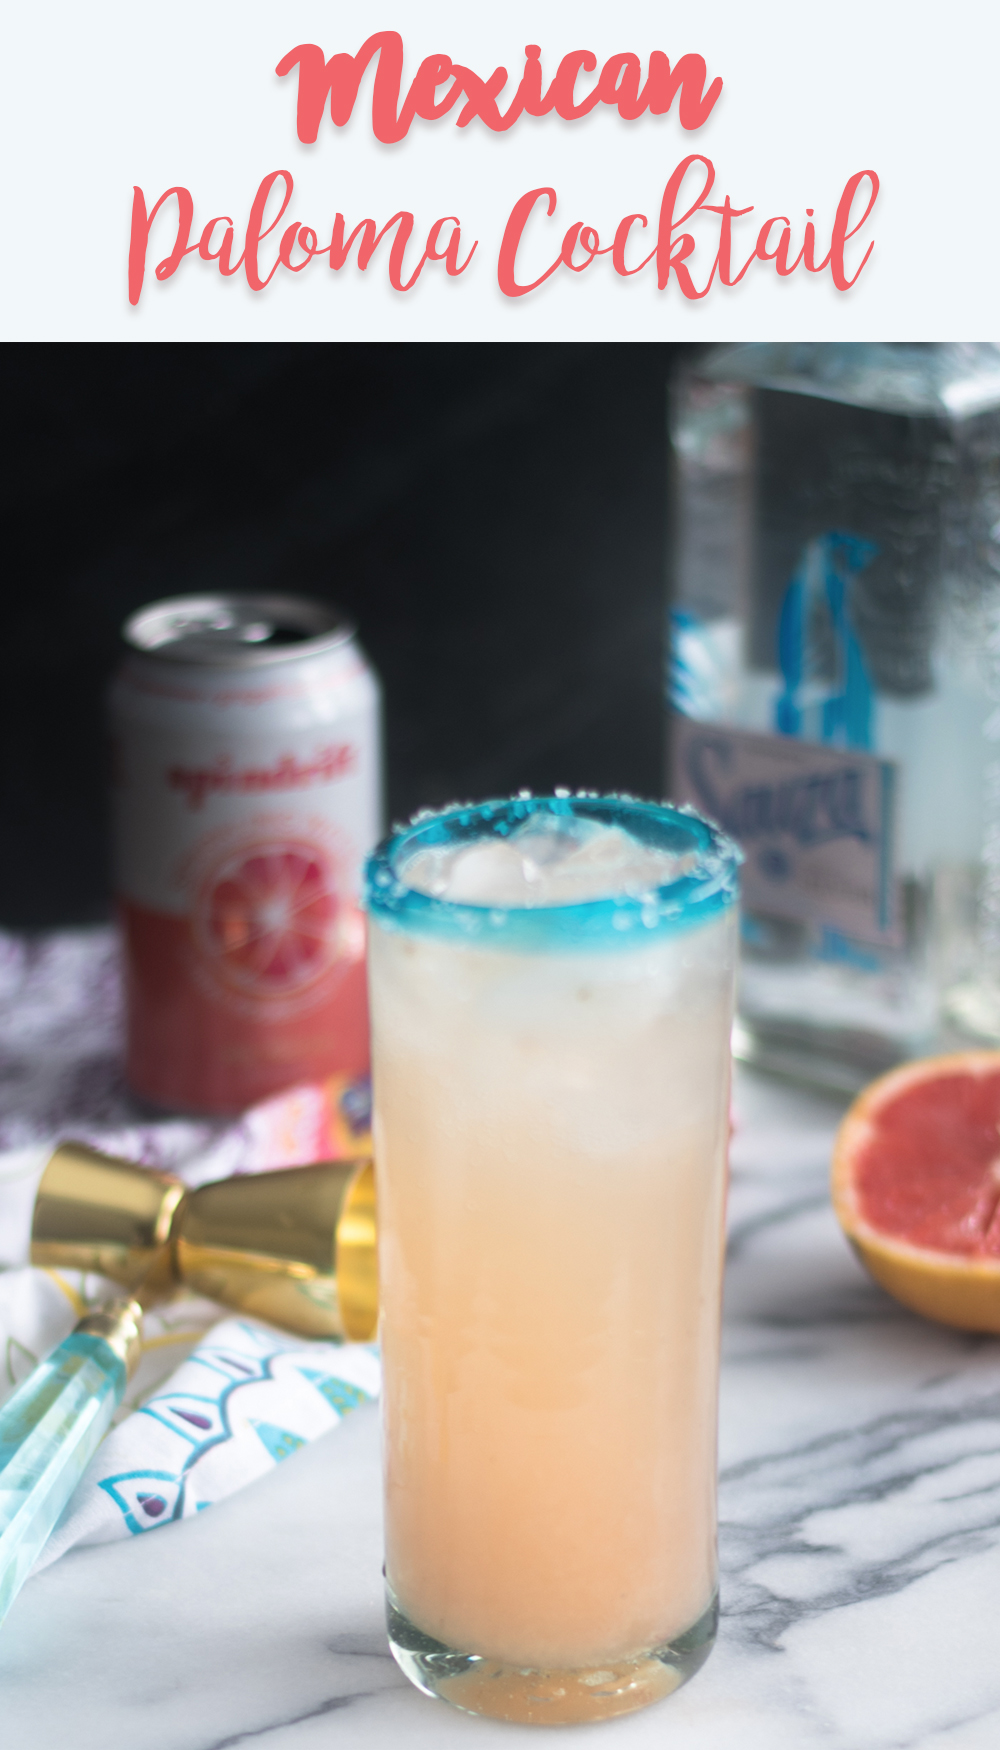 Mexican Paloma Cocktail is a light, refreshing cocktail made with tequila and fresh grapefruit juice. #Mexican #drink #vegan #healthy #cocktail 